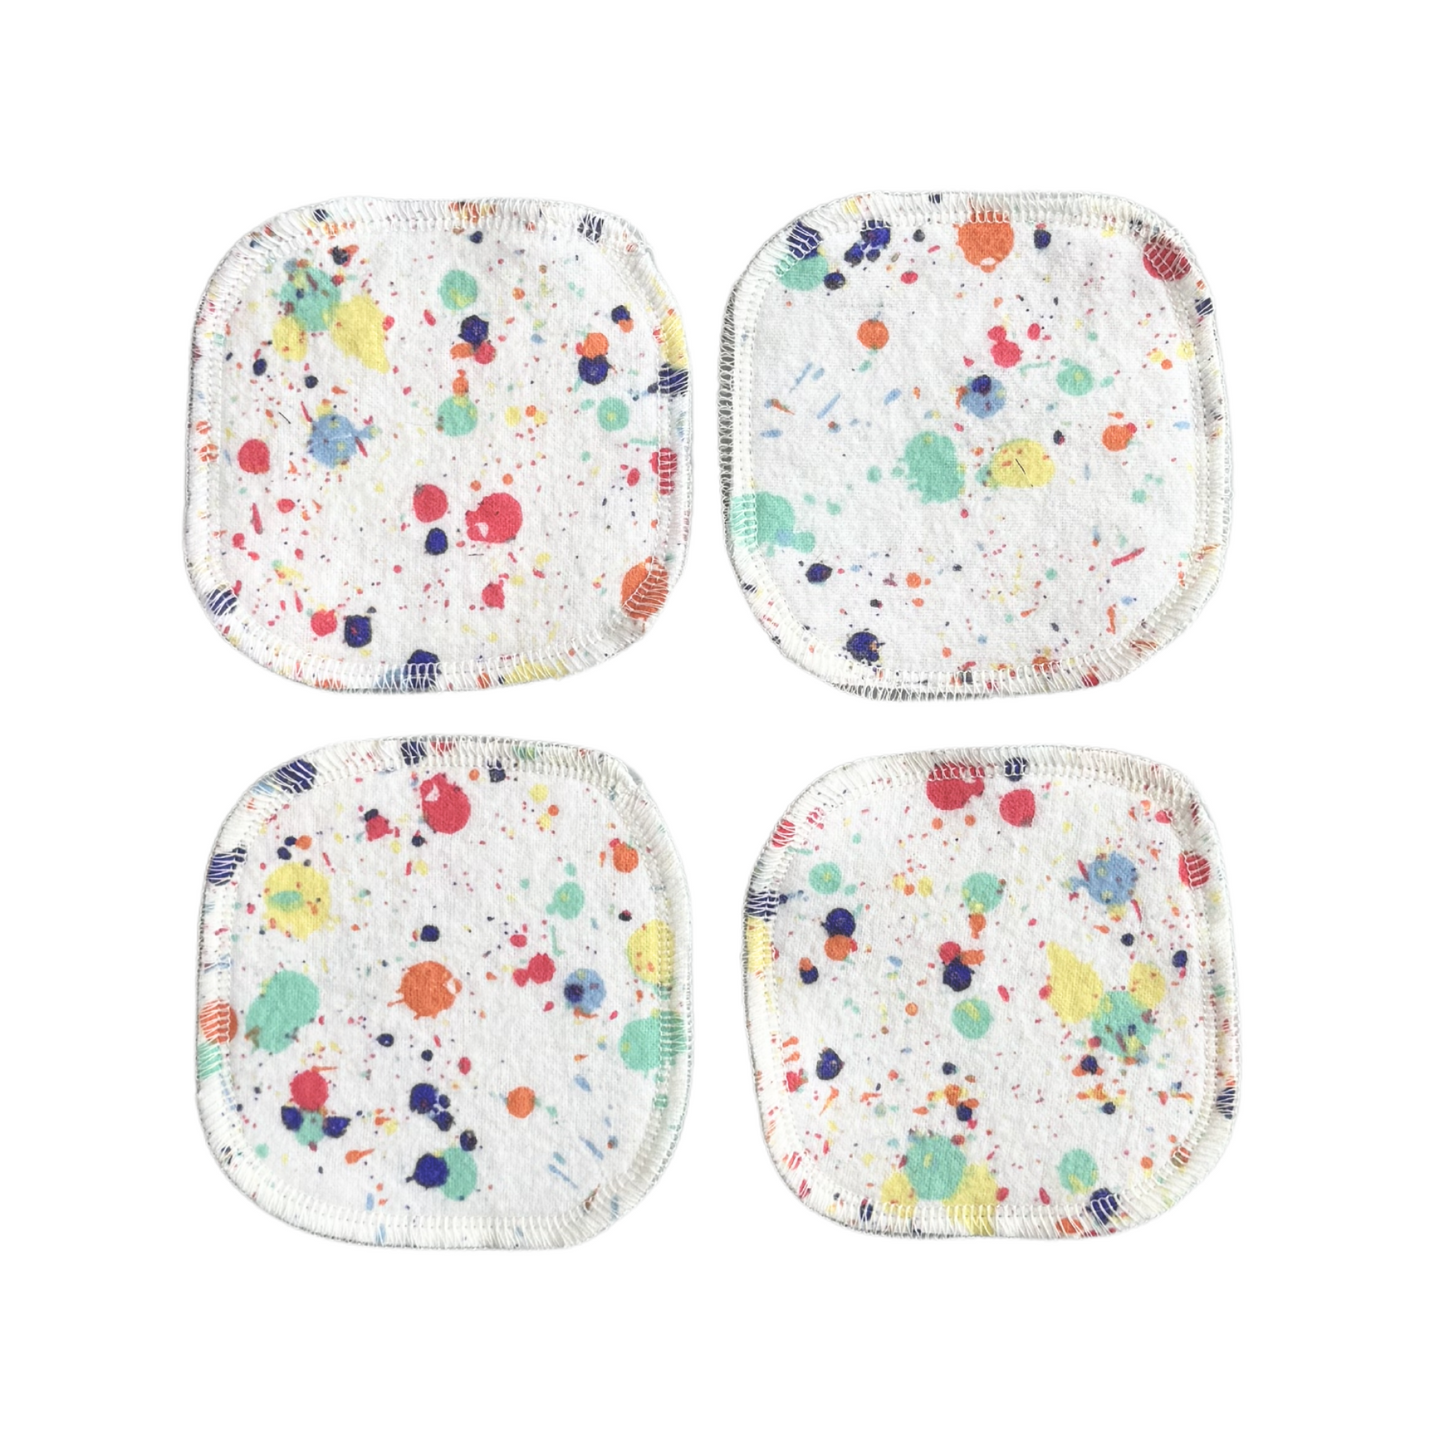 Large Re-usable Cotton Facial Rounds - Pack of 4 Rounds